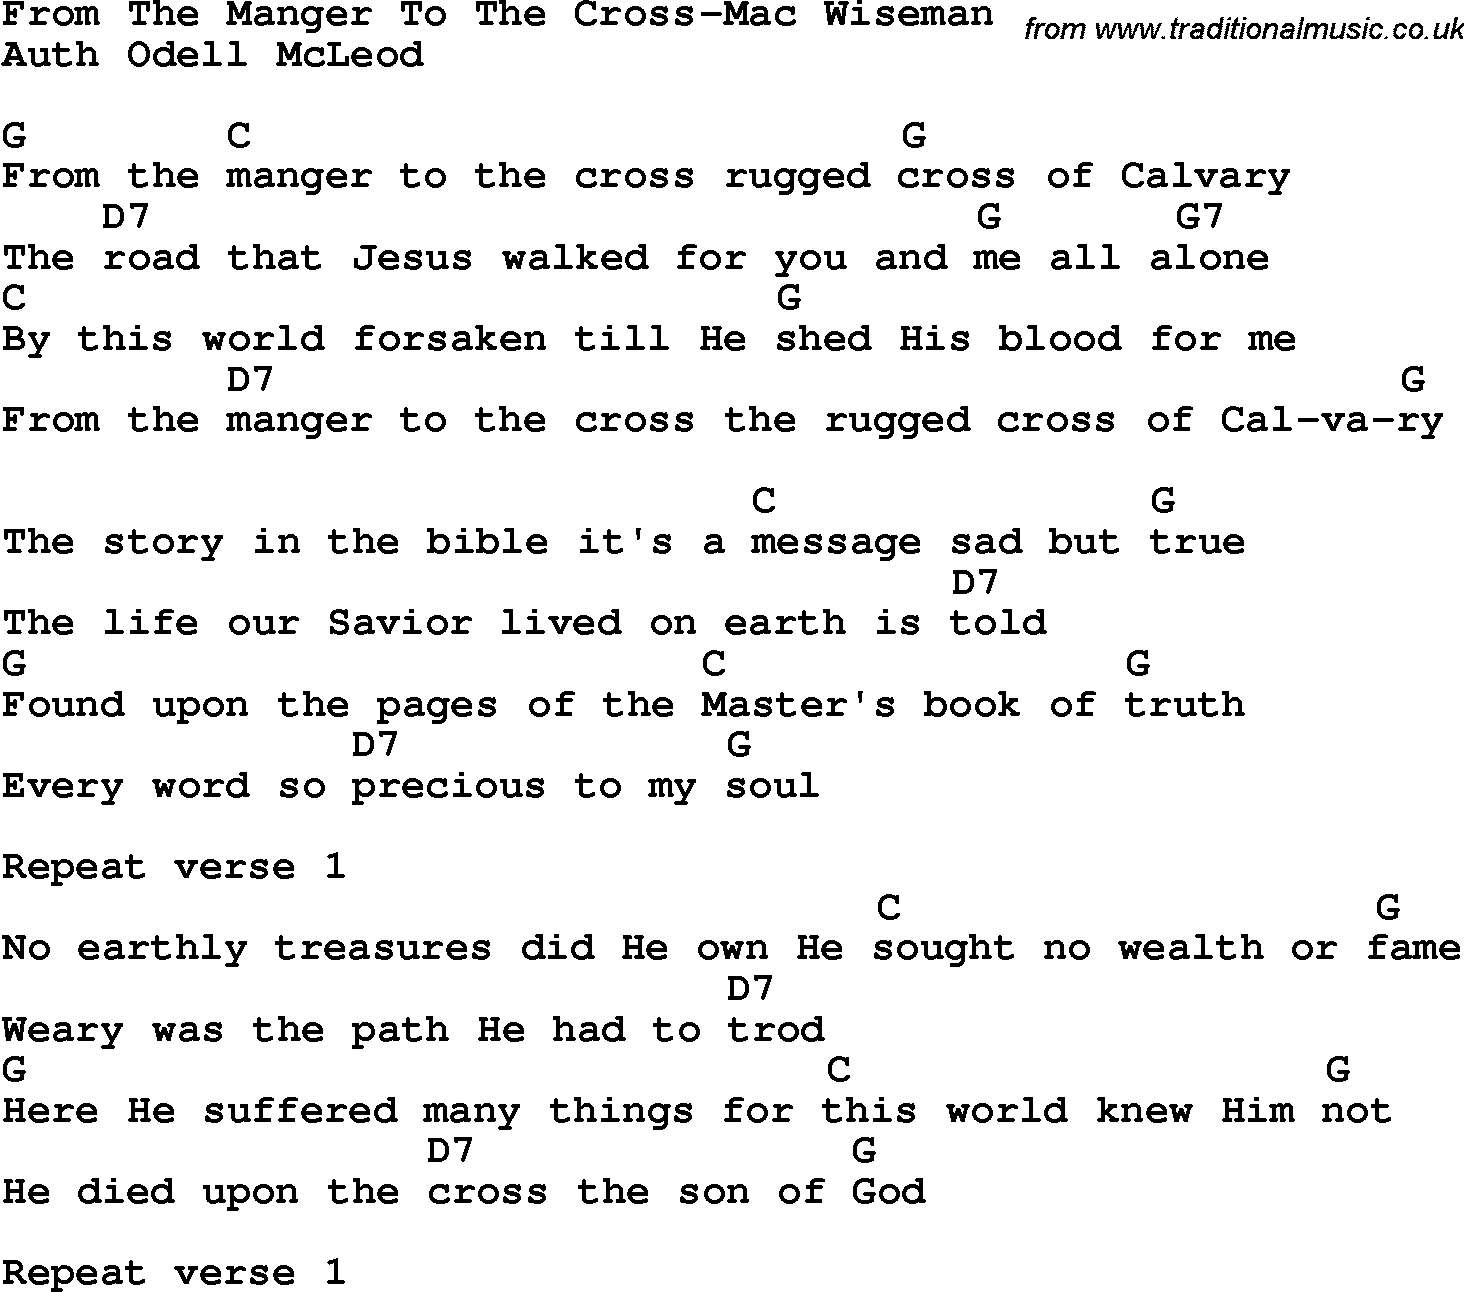 Country, Southern and Bluegrass Gospel Song From The Manger To The Cross-Mac Wiseman lyrics and chords